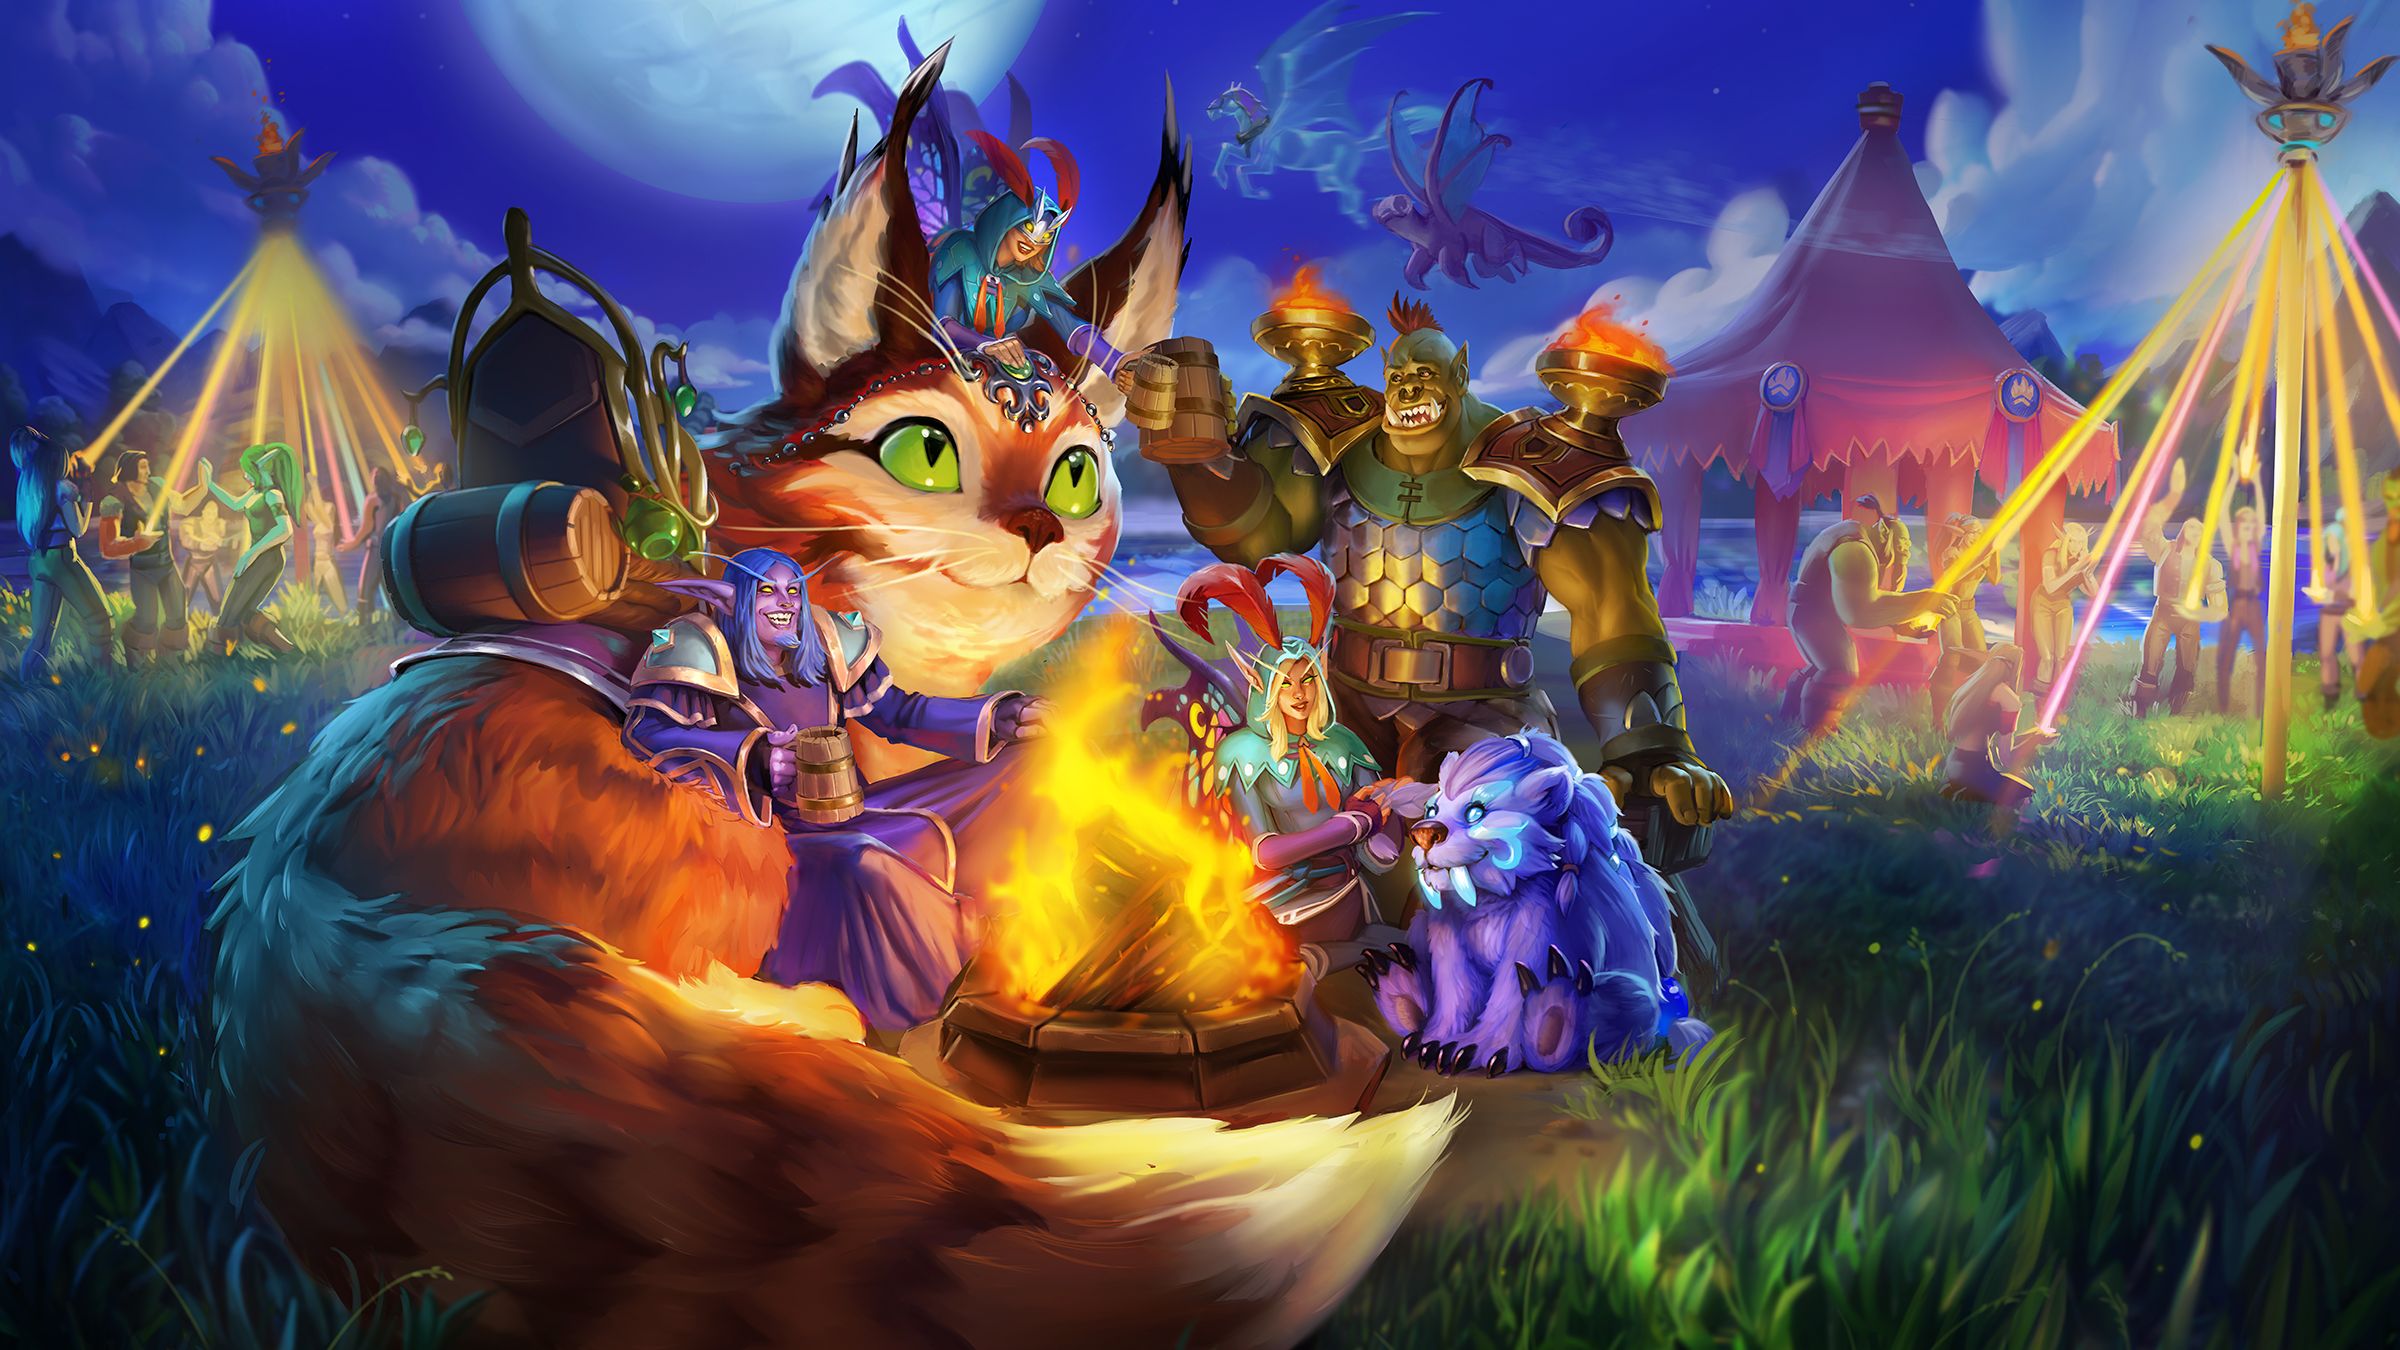 Summer Sale is here! Save Big on Mounts, Pets, Game Services, and More.